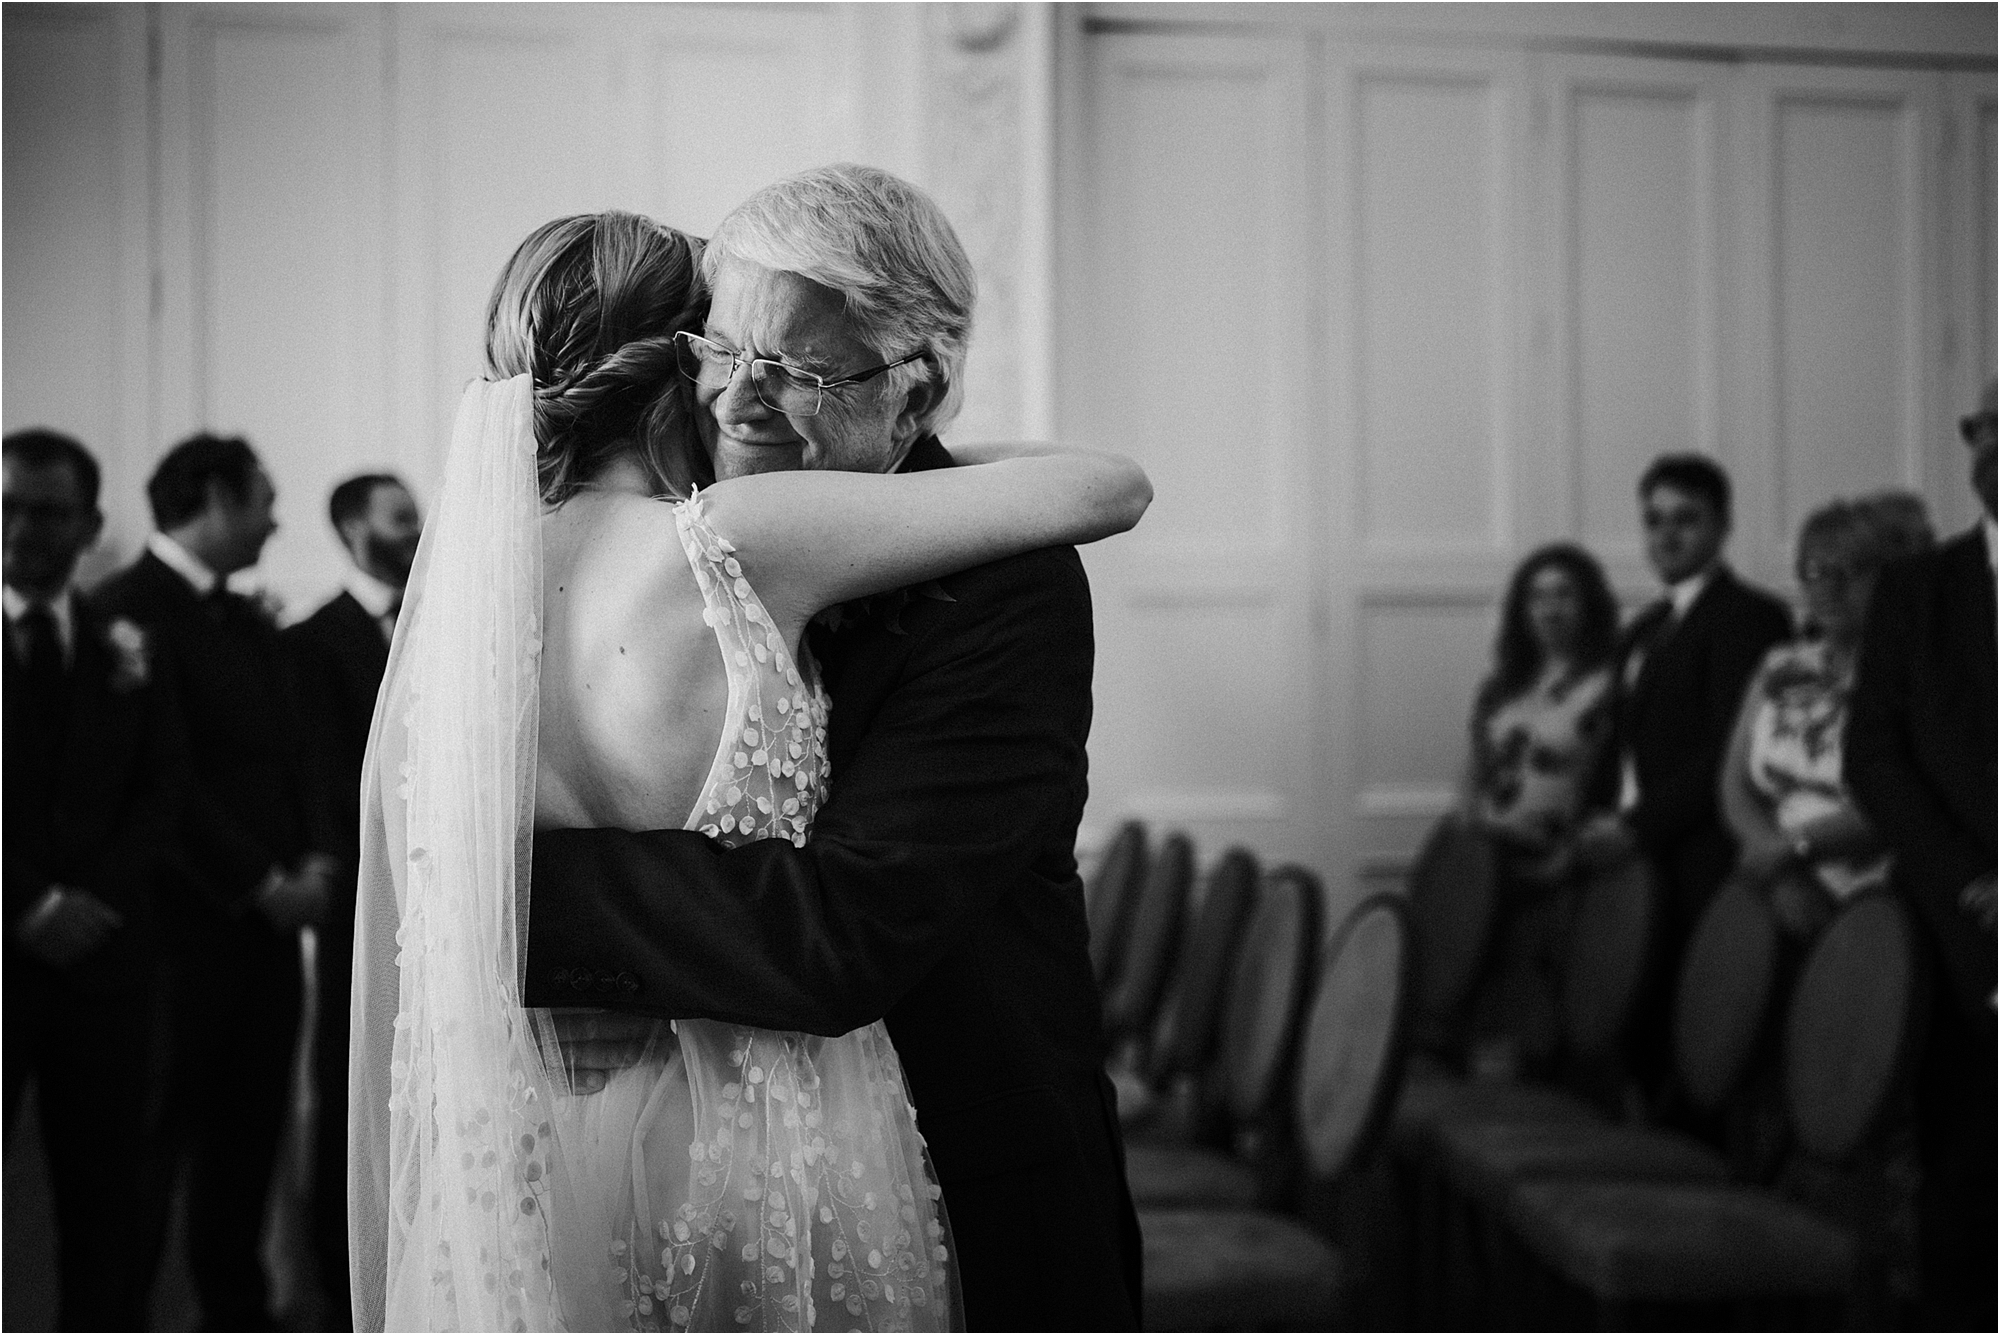 A dad giving his daughter a hug during the wedding ceremony at the Trafalgar Tavern Greenwich, London.